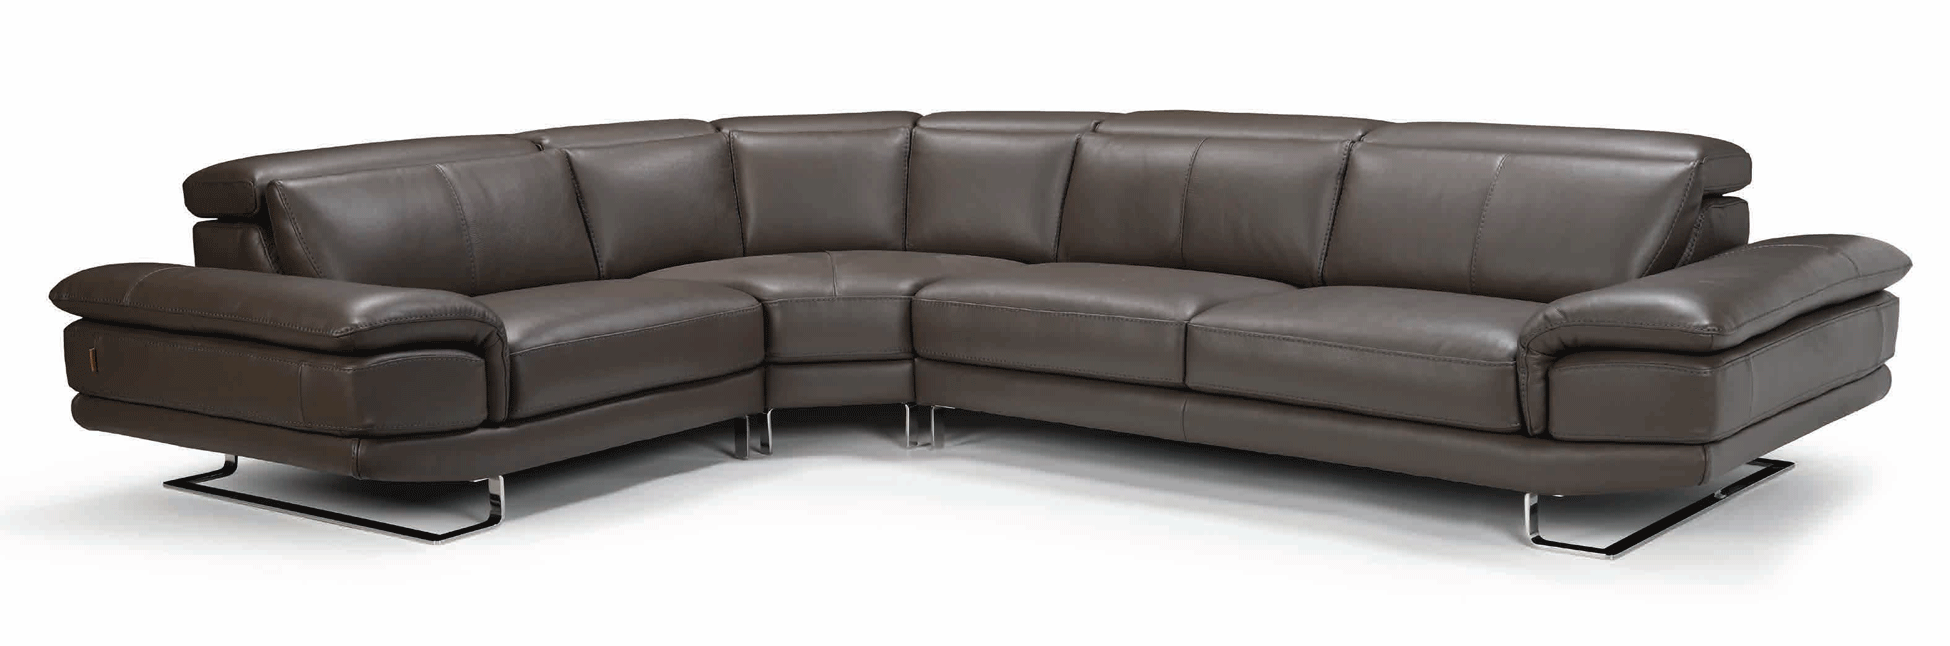 Living Room Furniture Reclining and Sliding Seats Sets Prato Living room